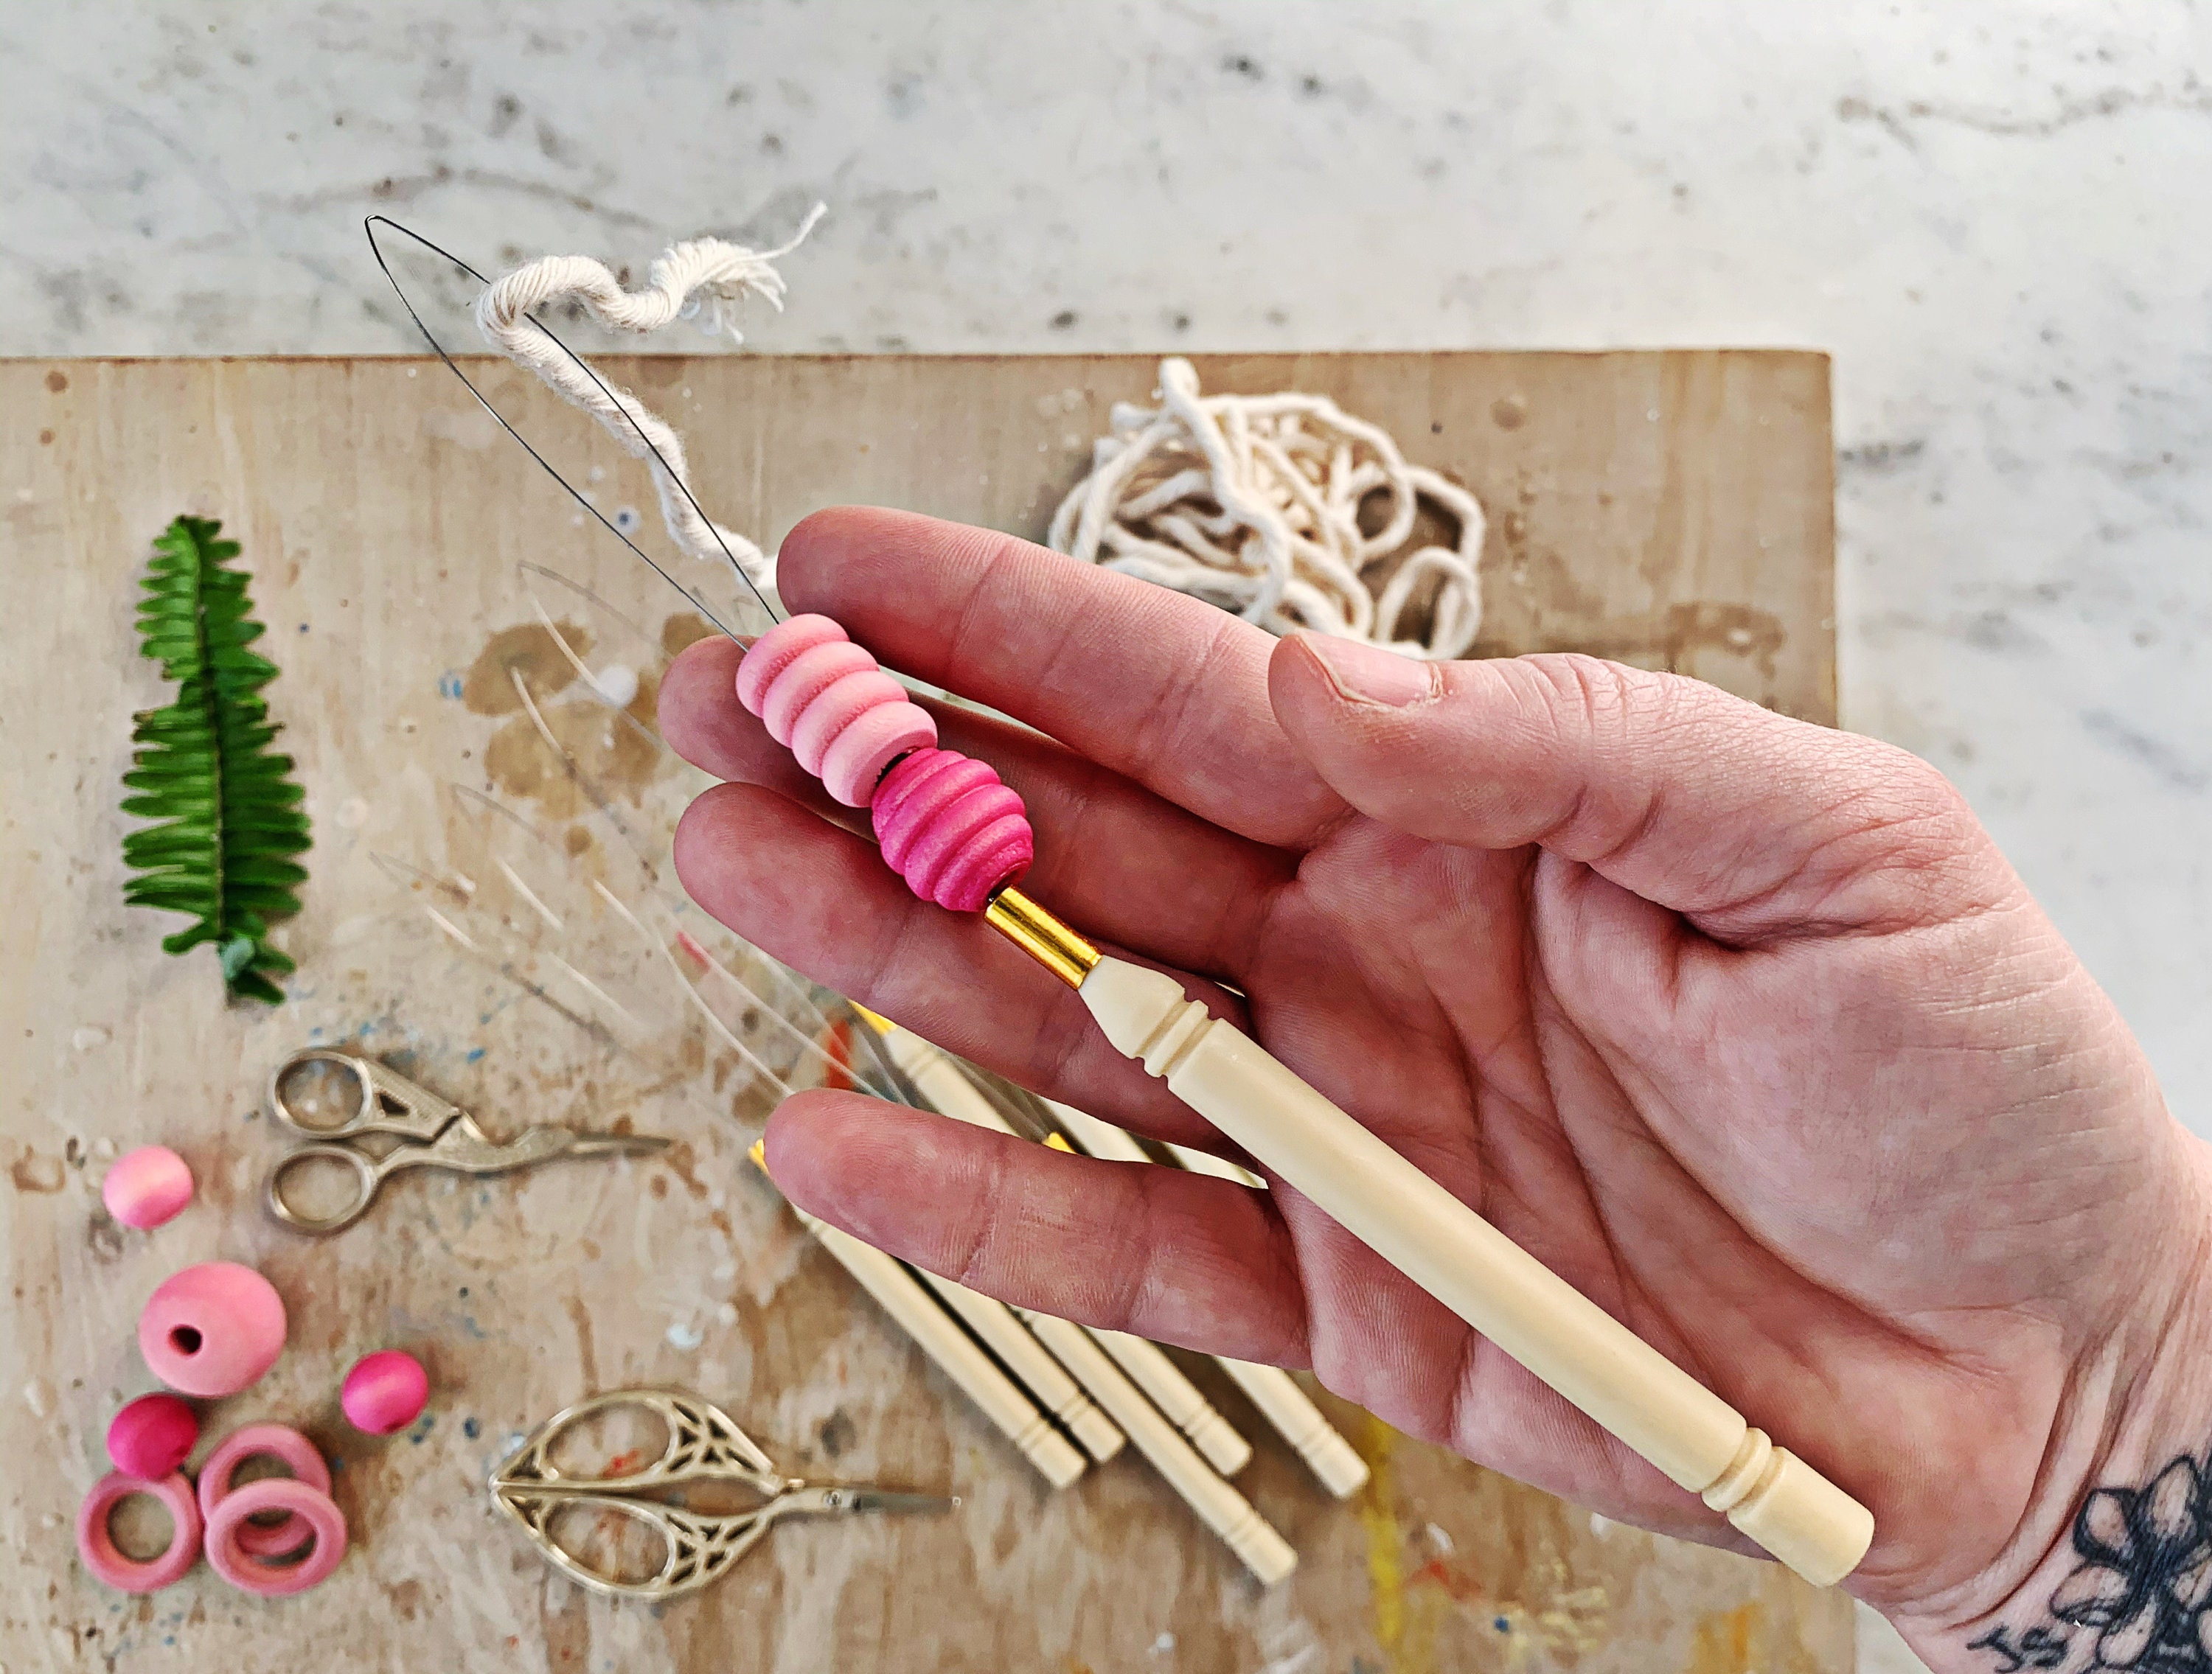 Selecting the Right Needles & Thread for Your Bead Craft Project